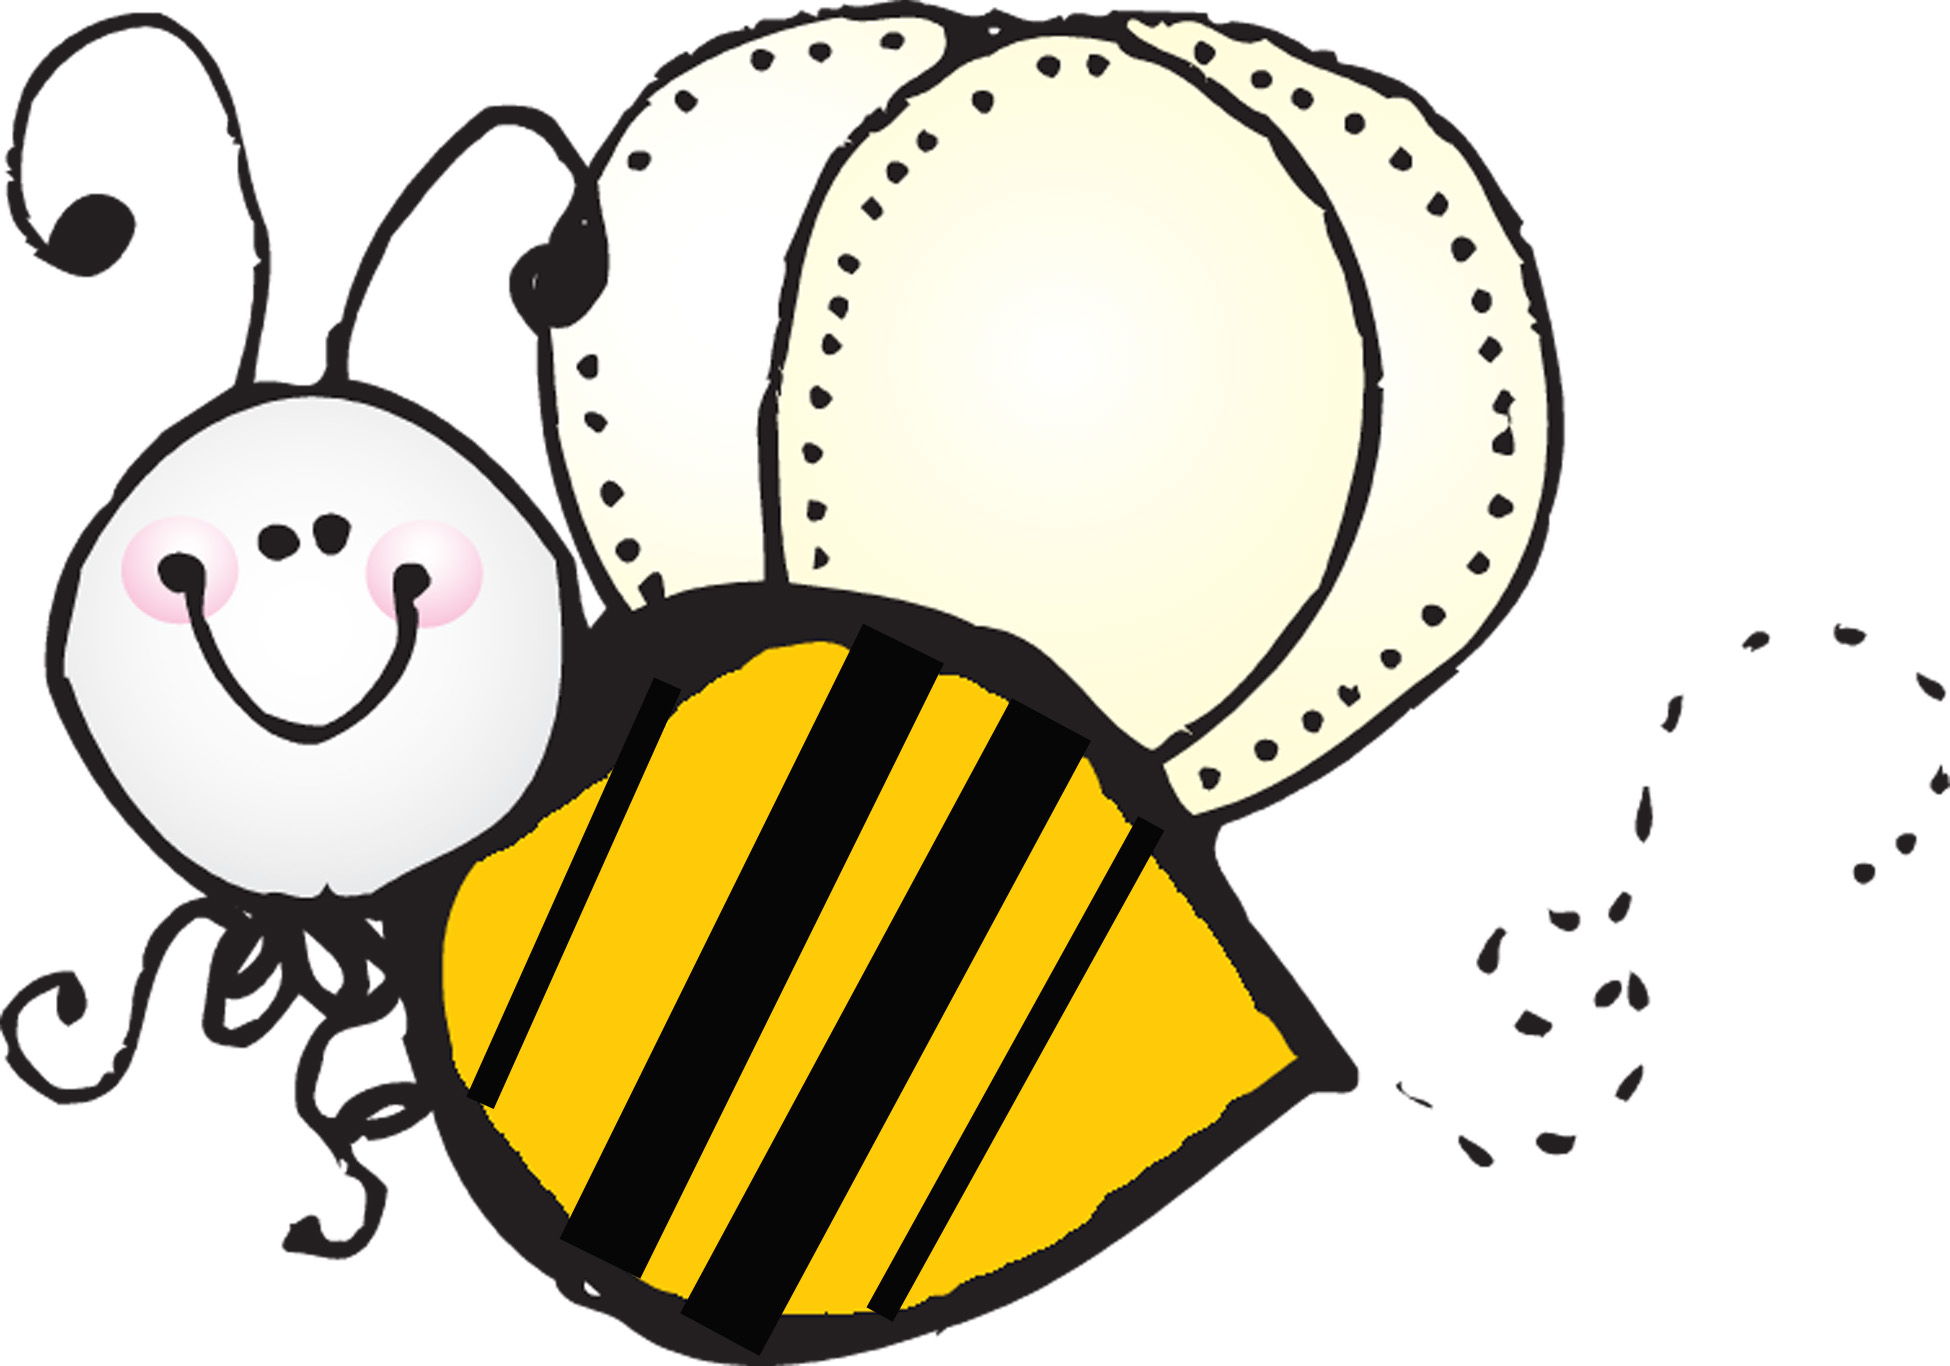 Bee spelling clipart 1 image